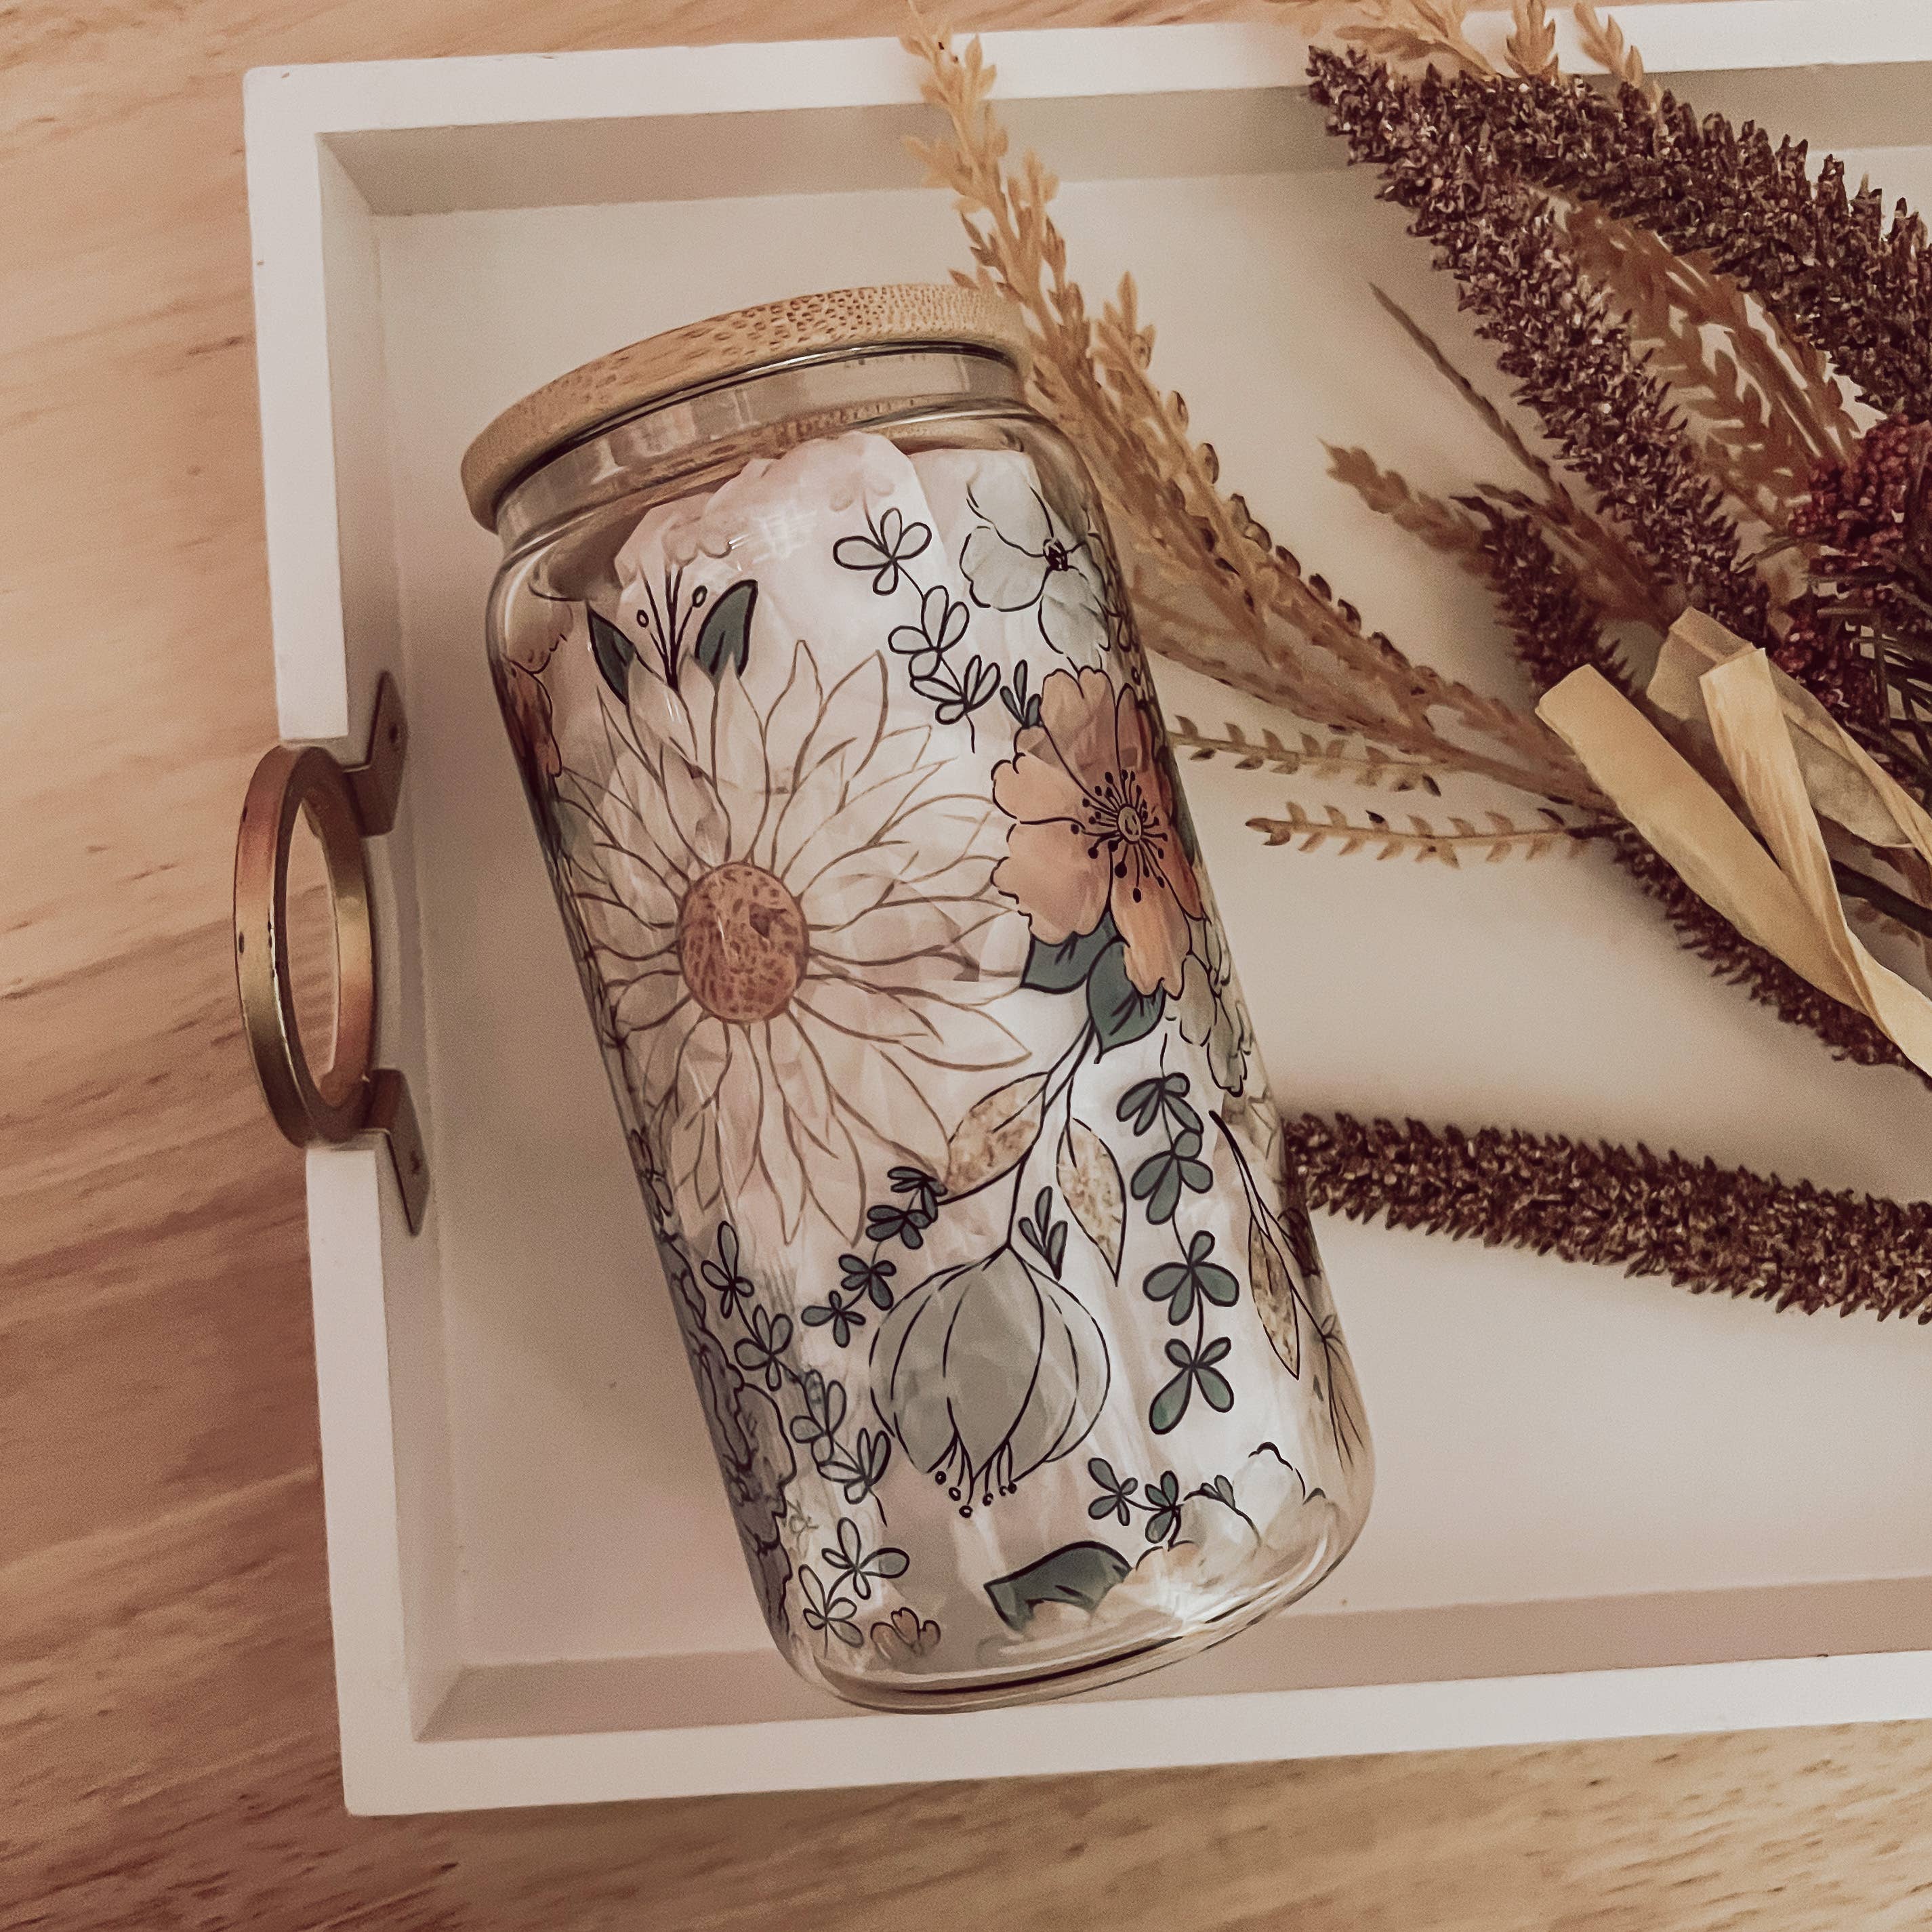 Sunflower Beer Can Glass | Summer Flowers | Libbey Glass Can | 16 oz. | 20  oz. | Bamboo Lid | Straws